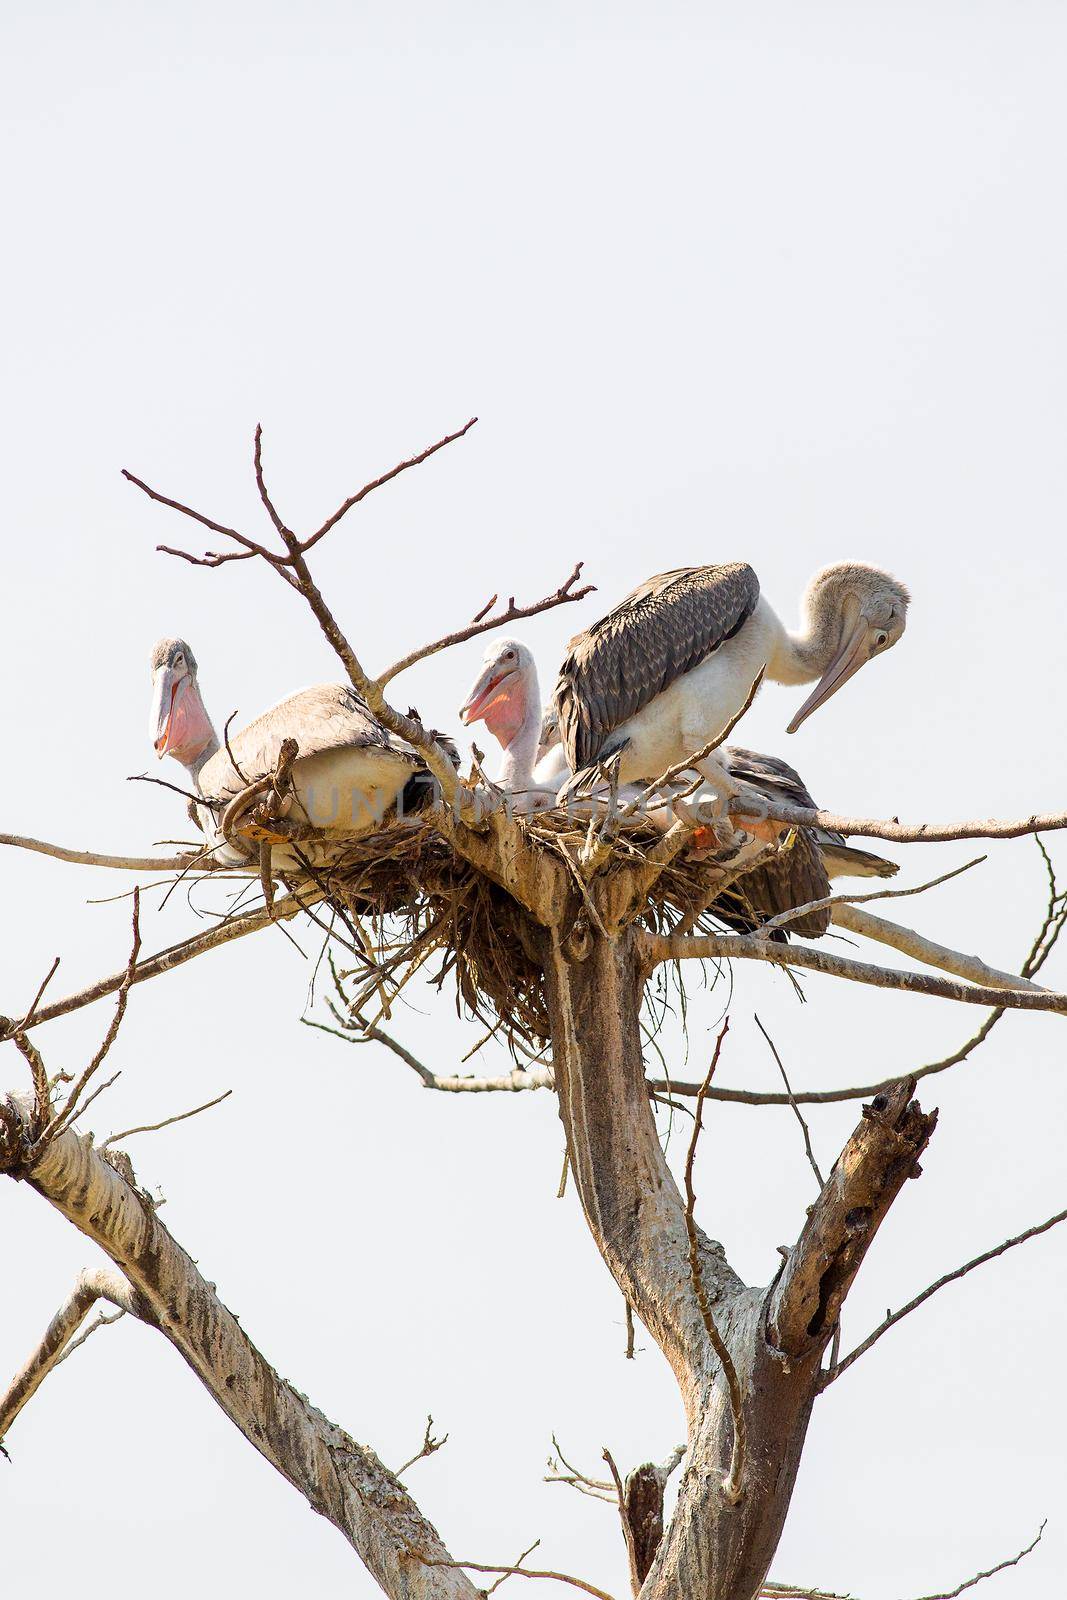 Pelican on its nest in the zoo